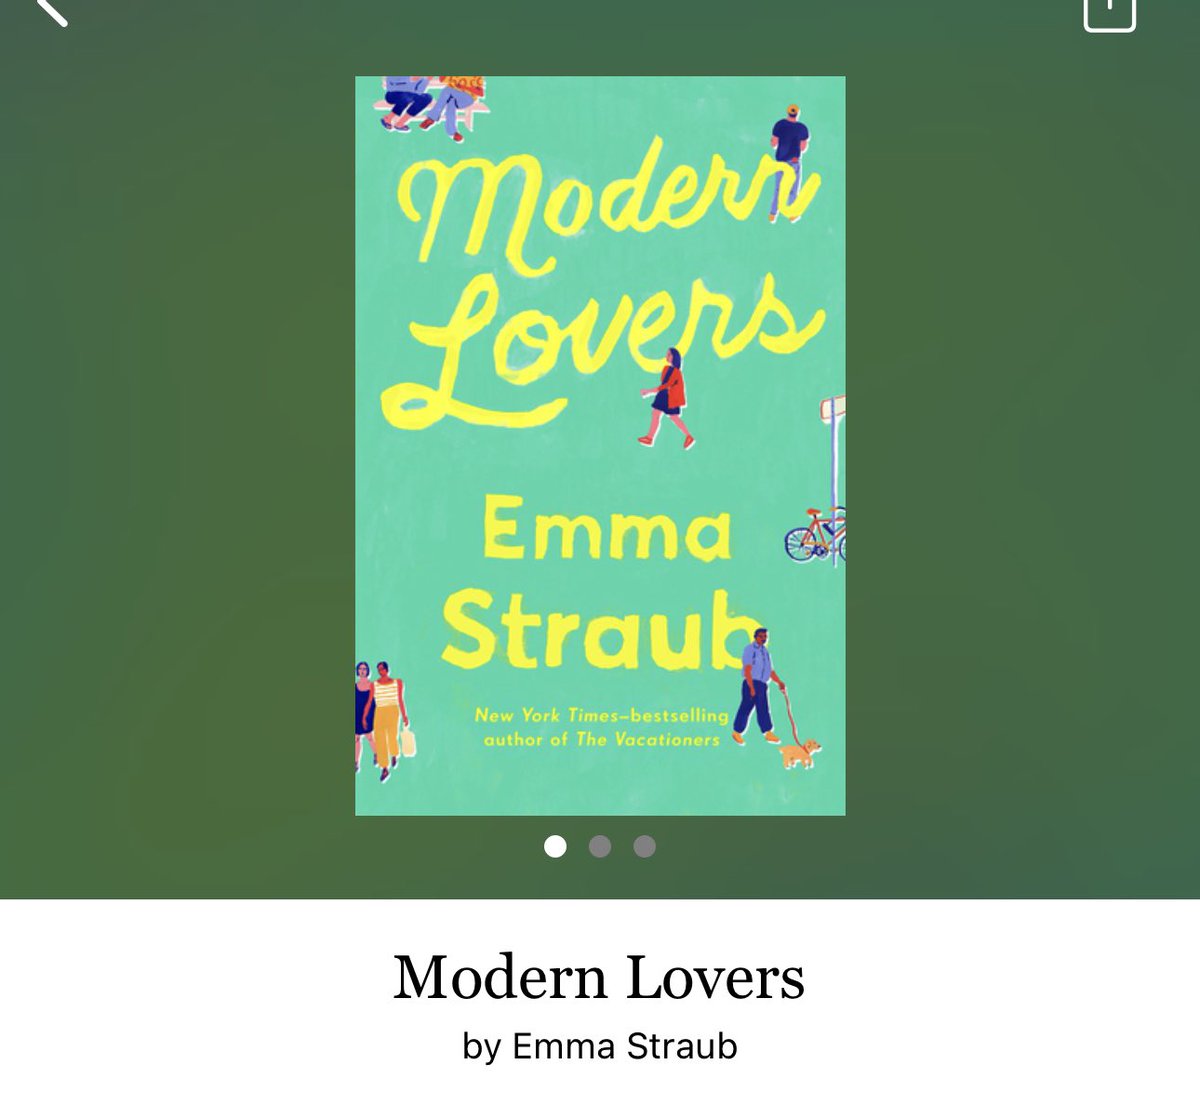 Modern Lovers by Emma Staub 

#ModernLovers by #EmmaStaub #5404 #71chapters #353pages #september2023 #947of400 #9houraudiobook #audiobook #42for11 #clearingoffreadingshelves #whatsnext #readitquick